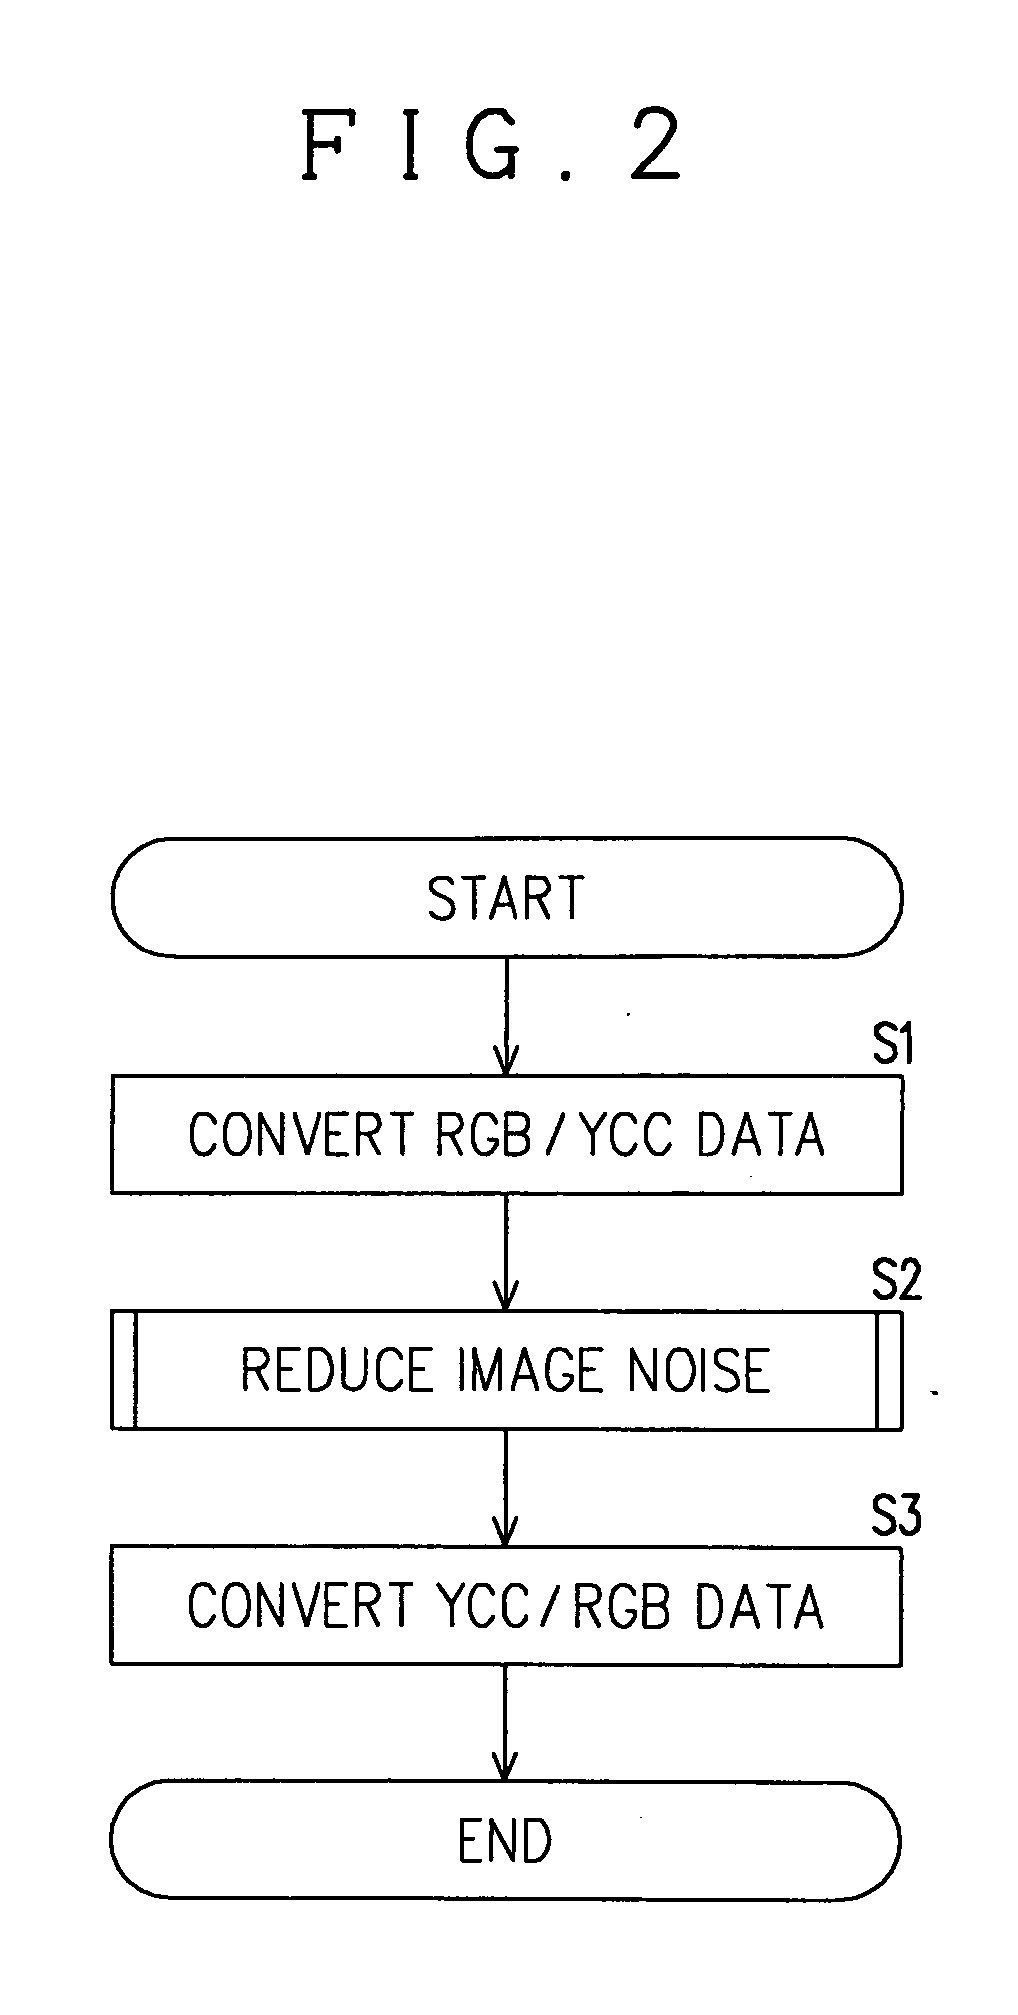 Method of reducing noise in images